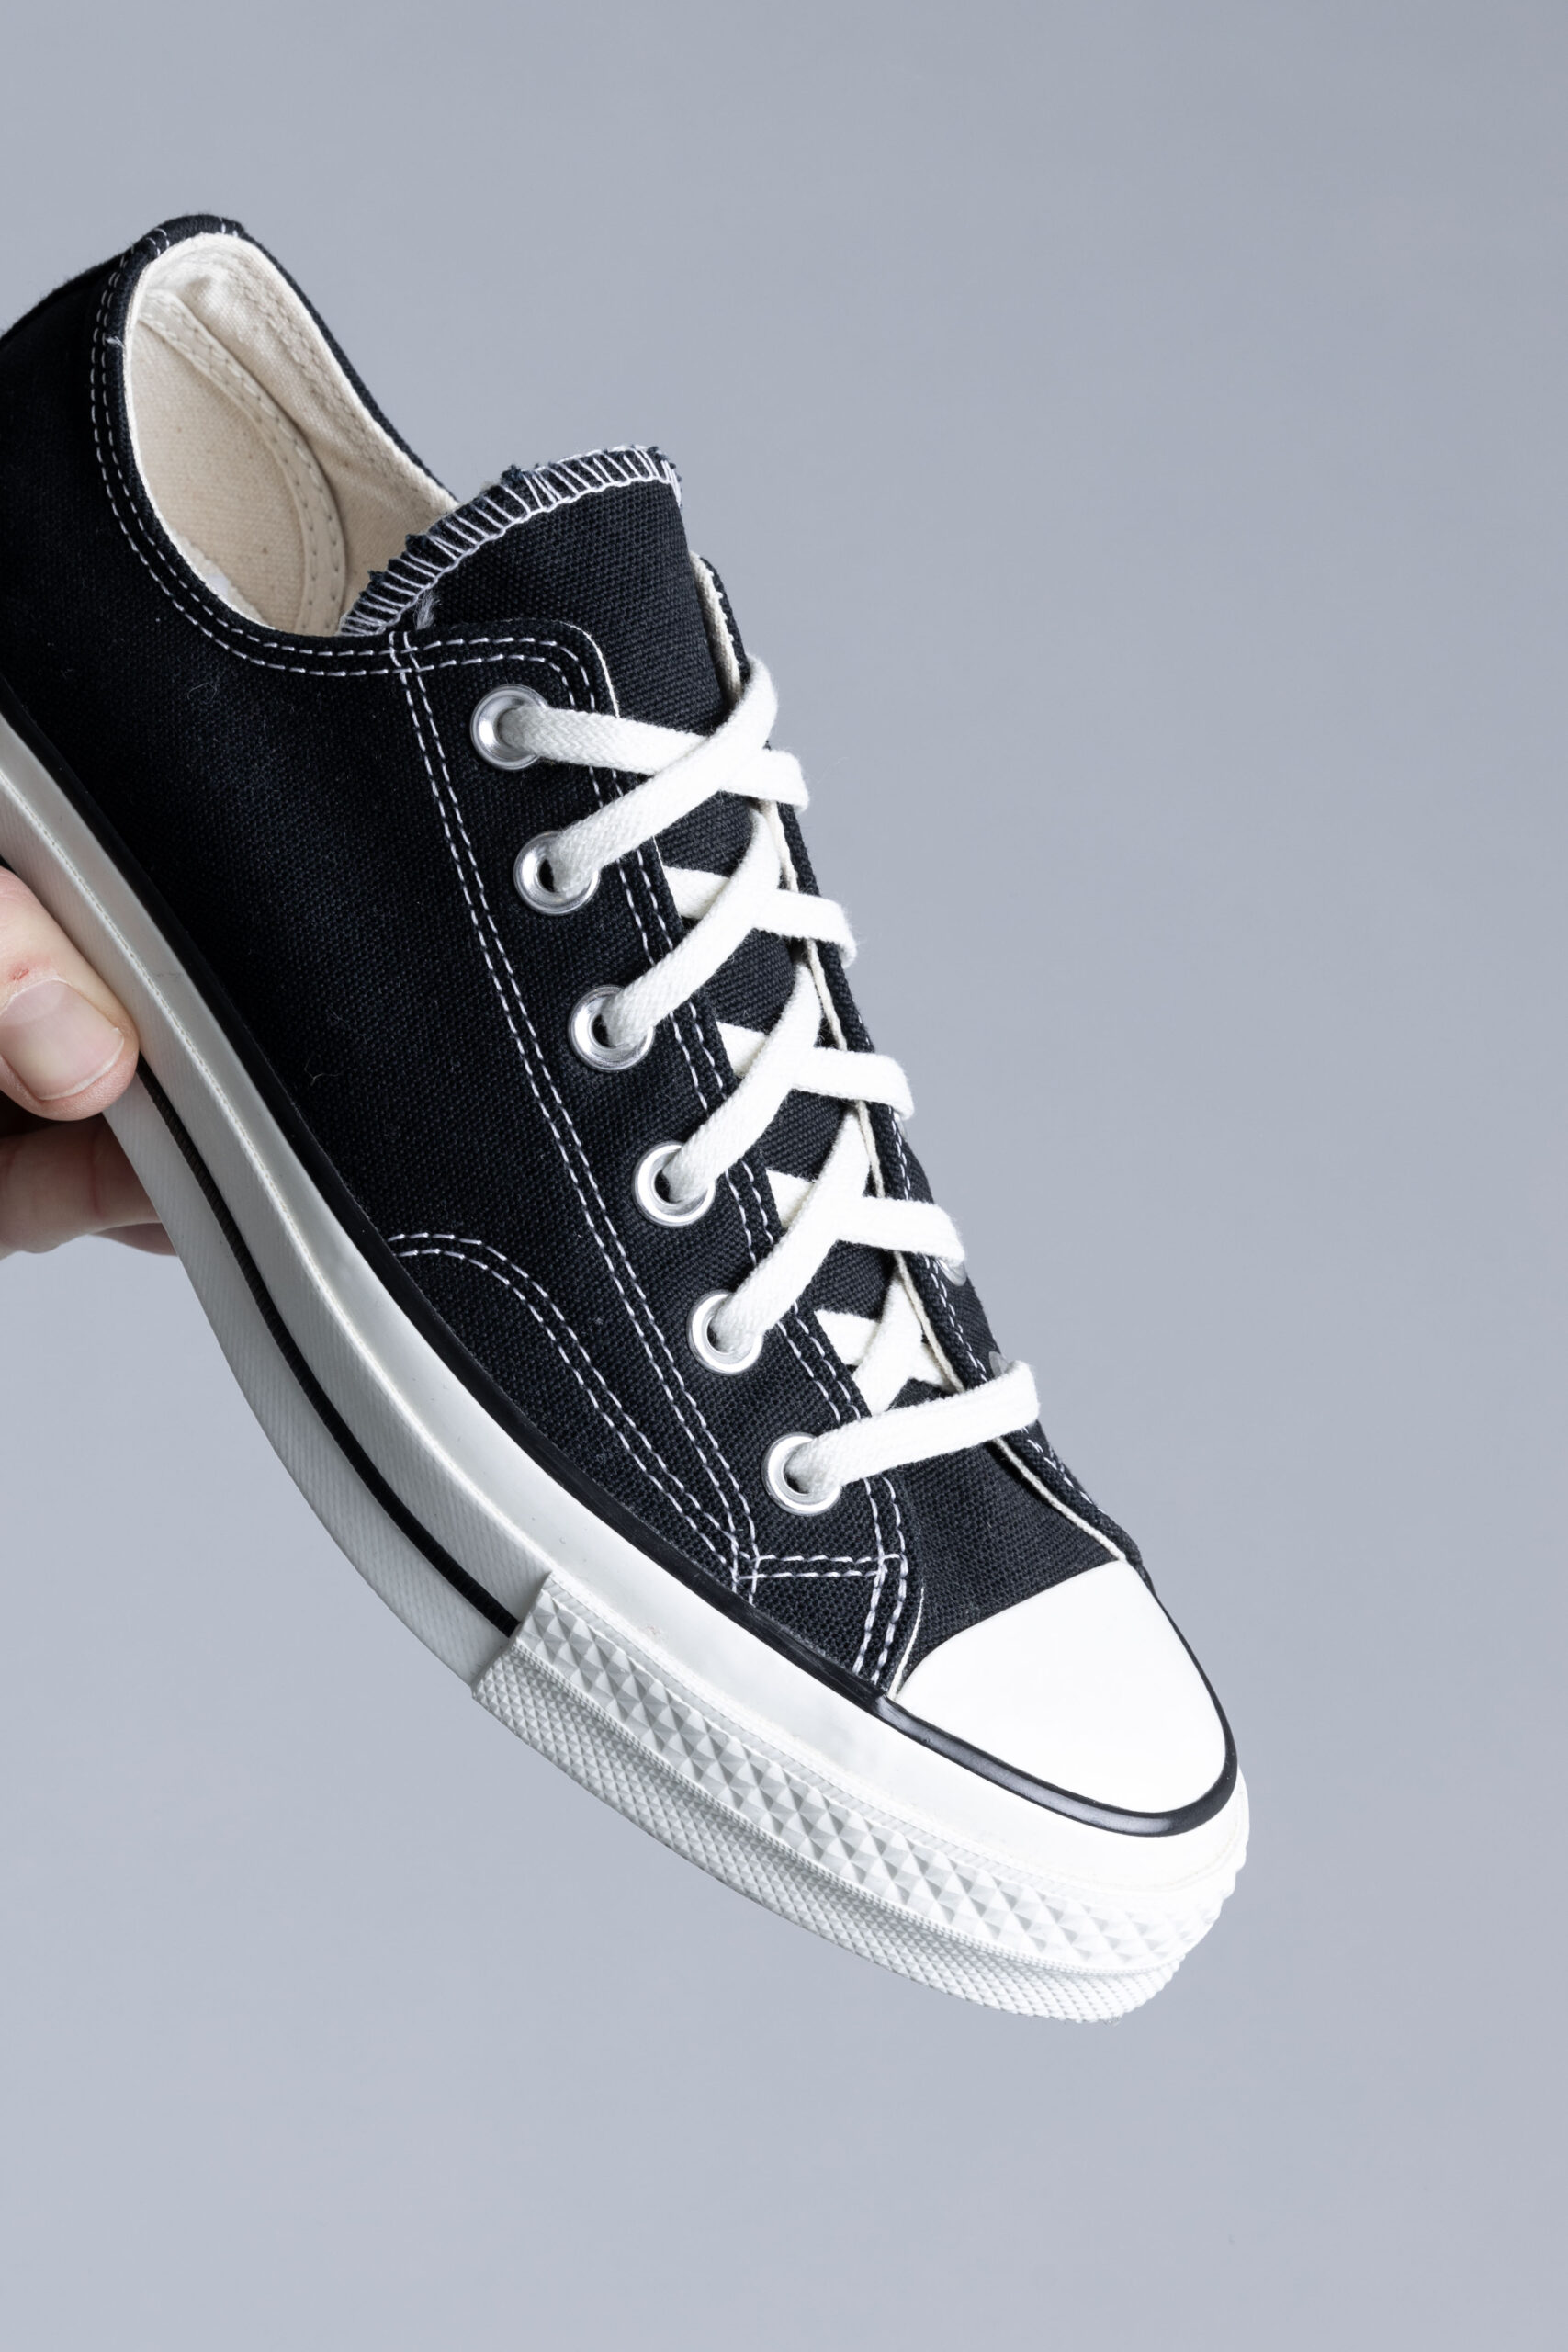 Converse Chuck Taylor Black 70 Low OX • Centreville Store